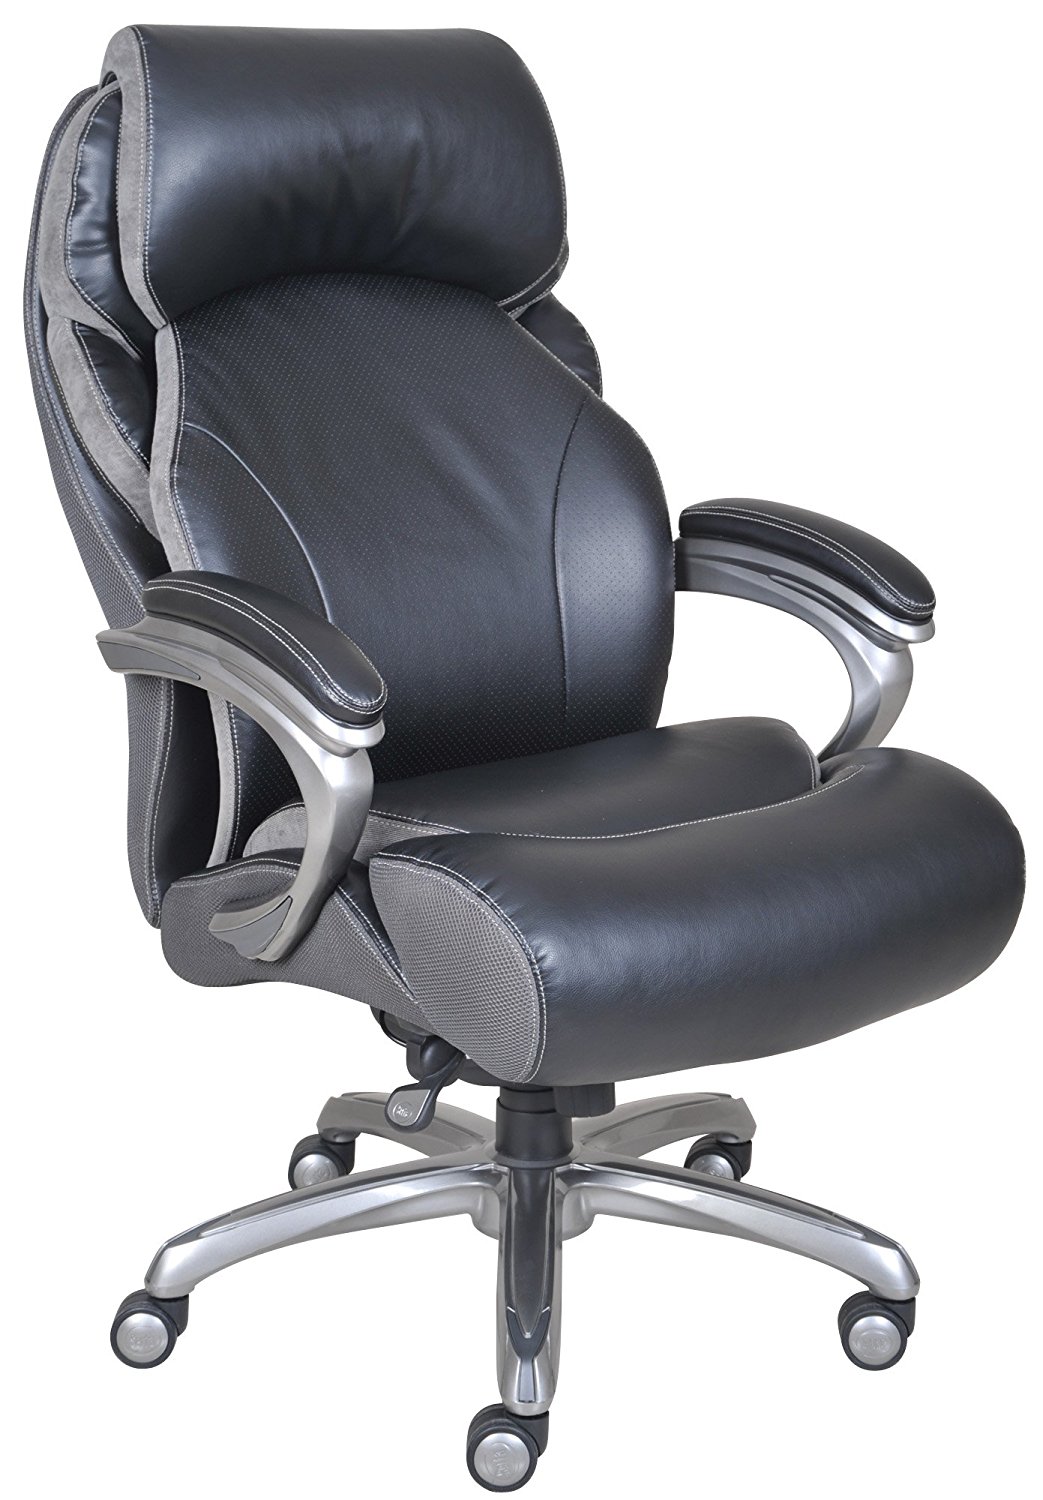 Today's Best Office Chair Under $500 | The Top Rated Office Chairs